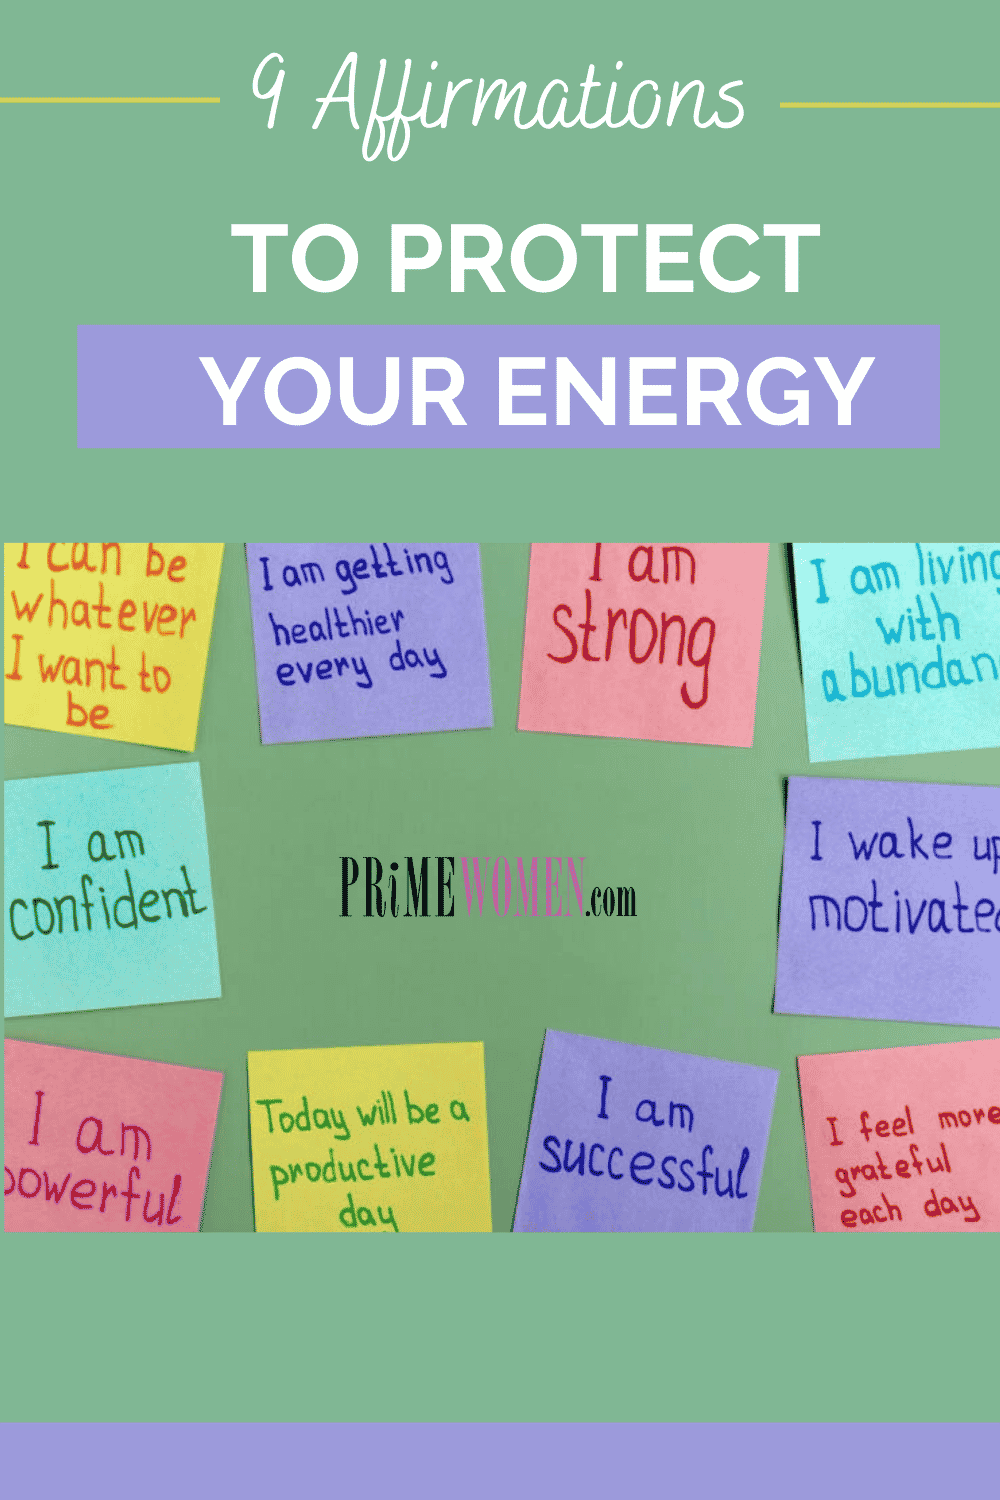 9 Affirmations to Protect Your Energy